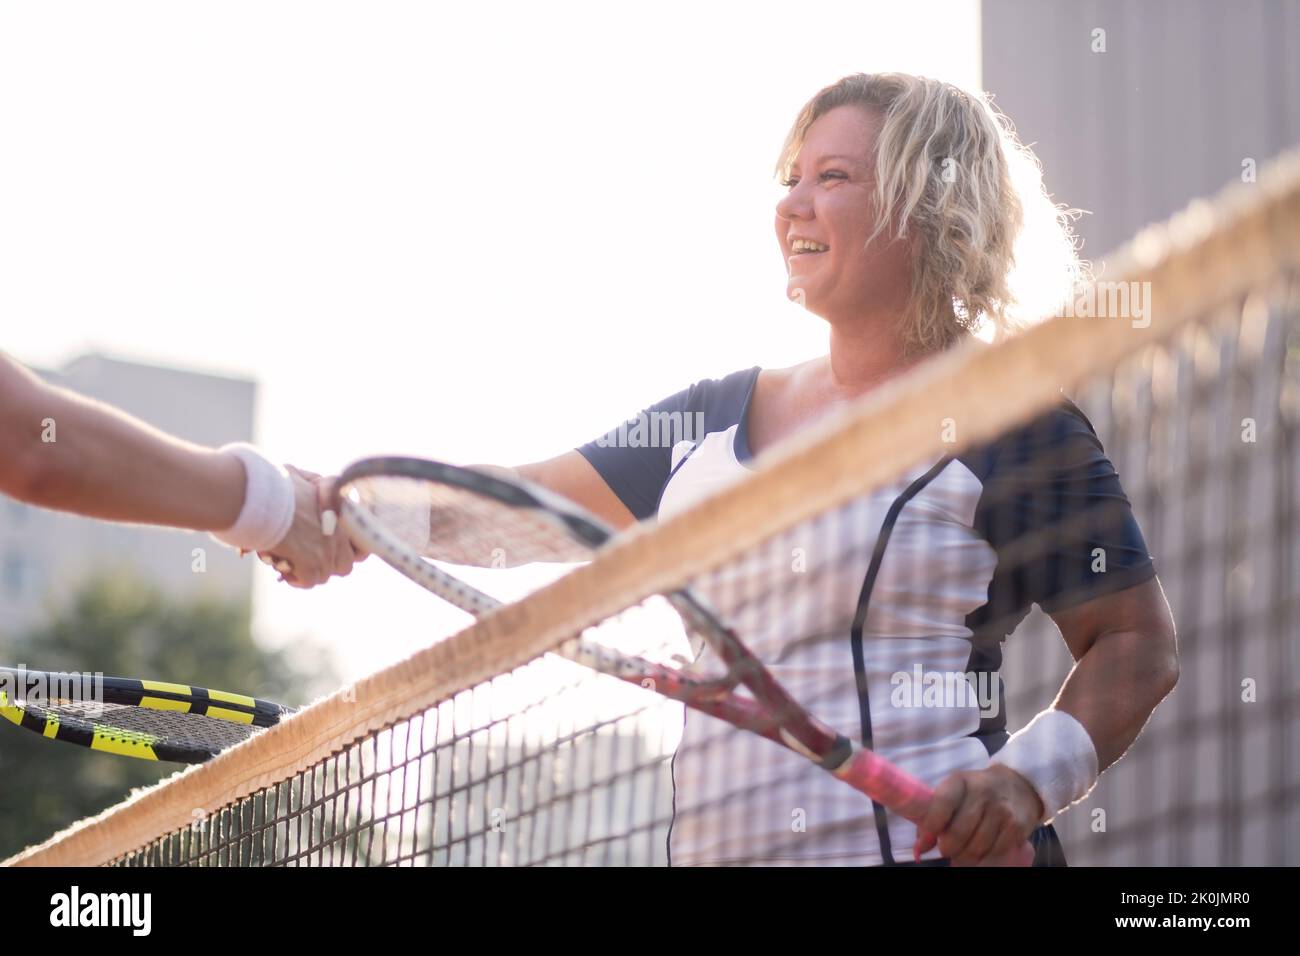 Mature woman shaking hand after playing tennis outside. Stock Photo